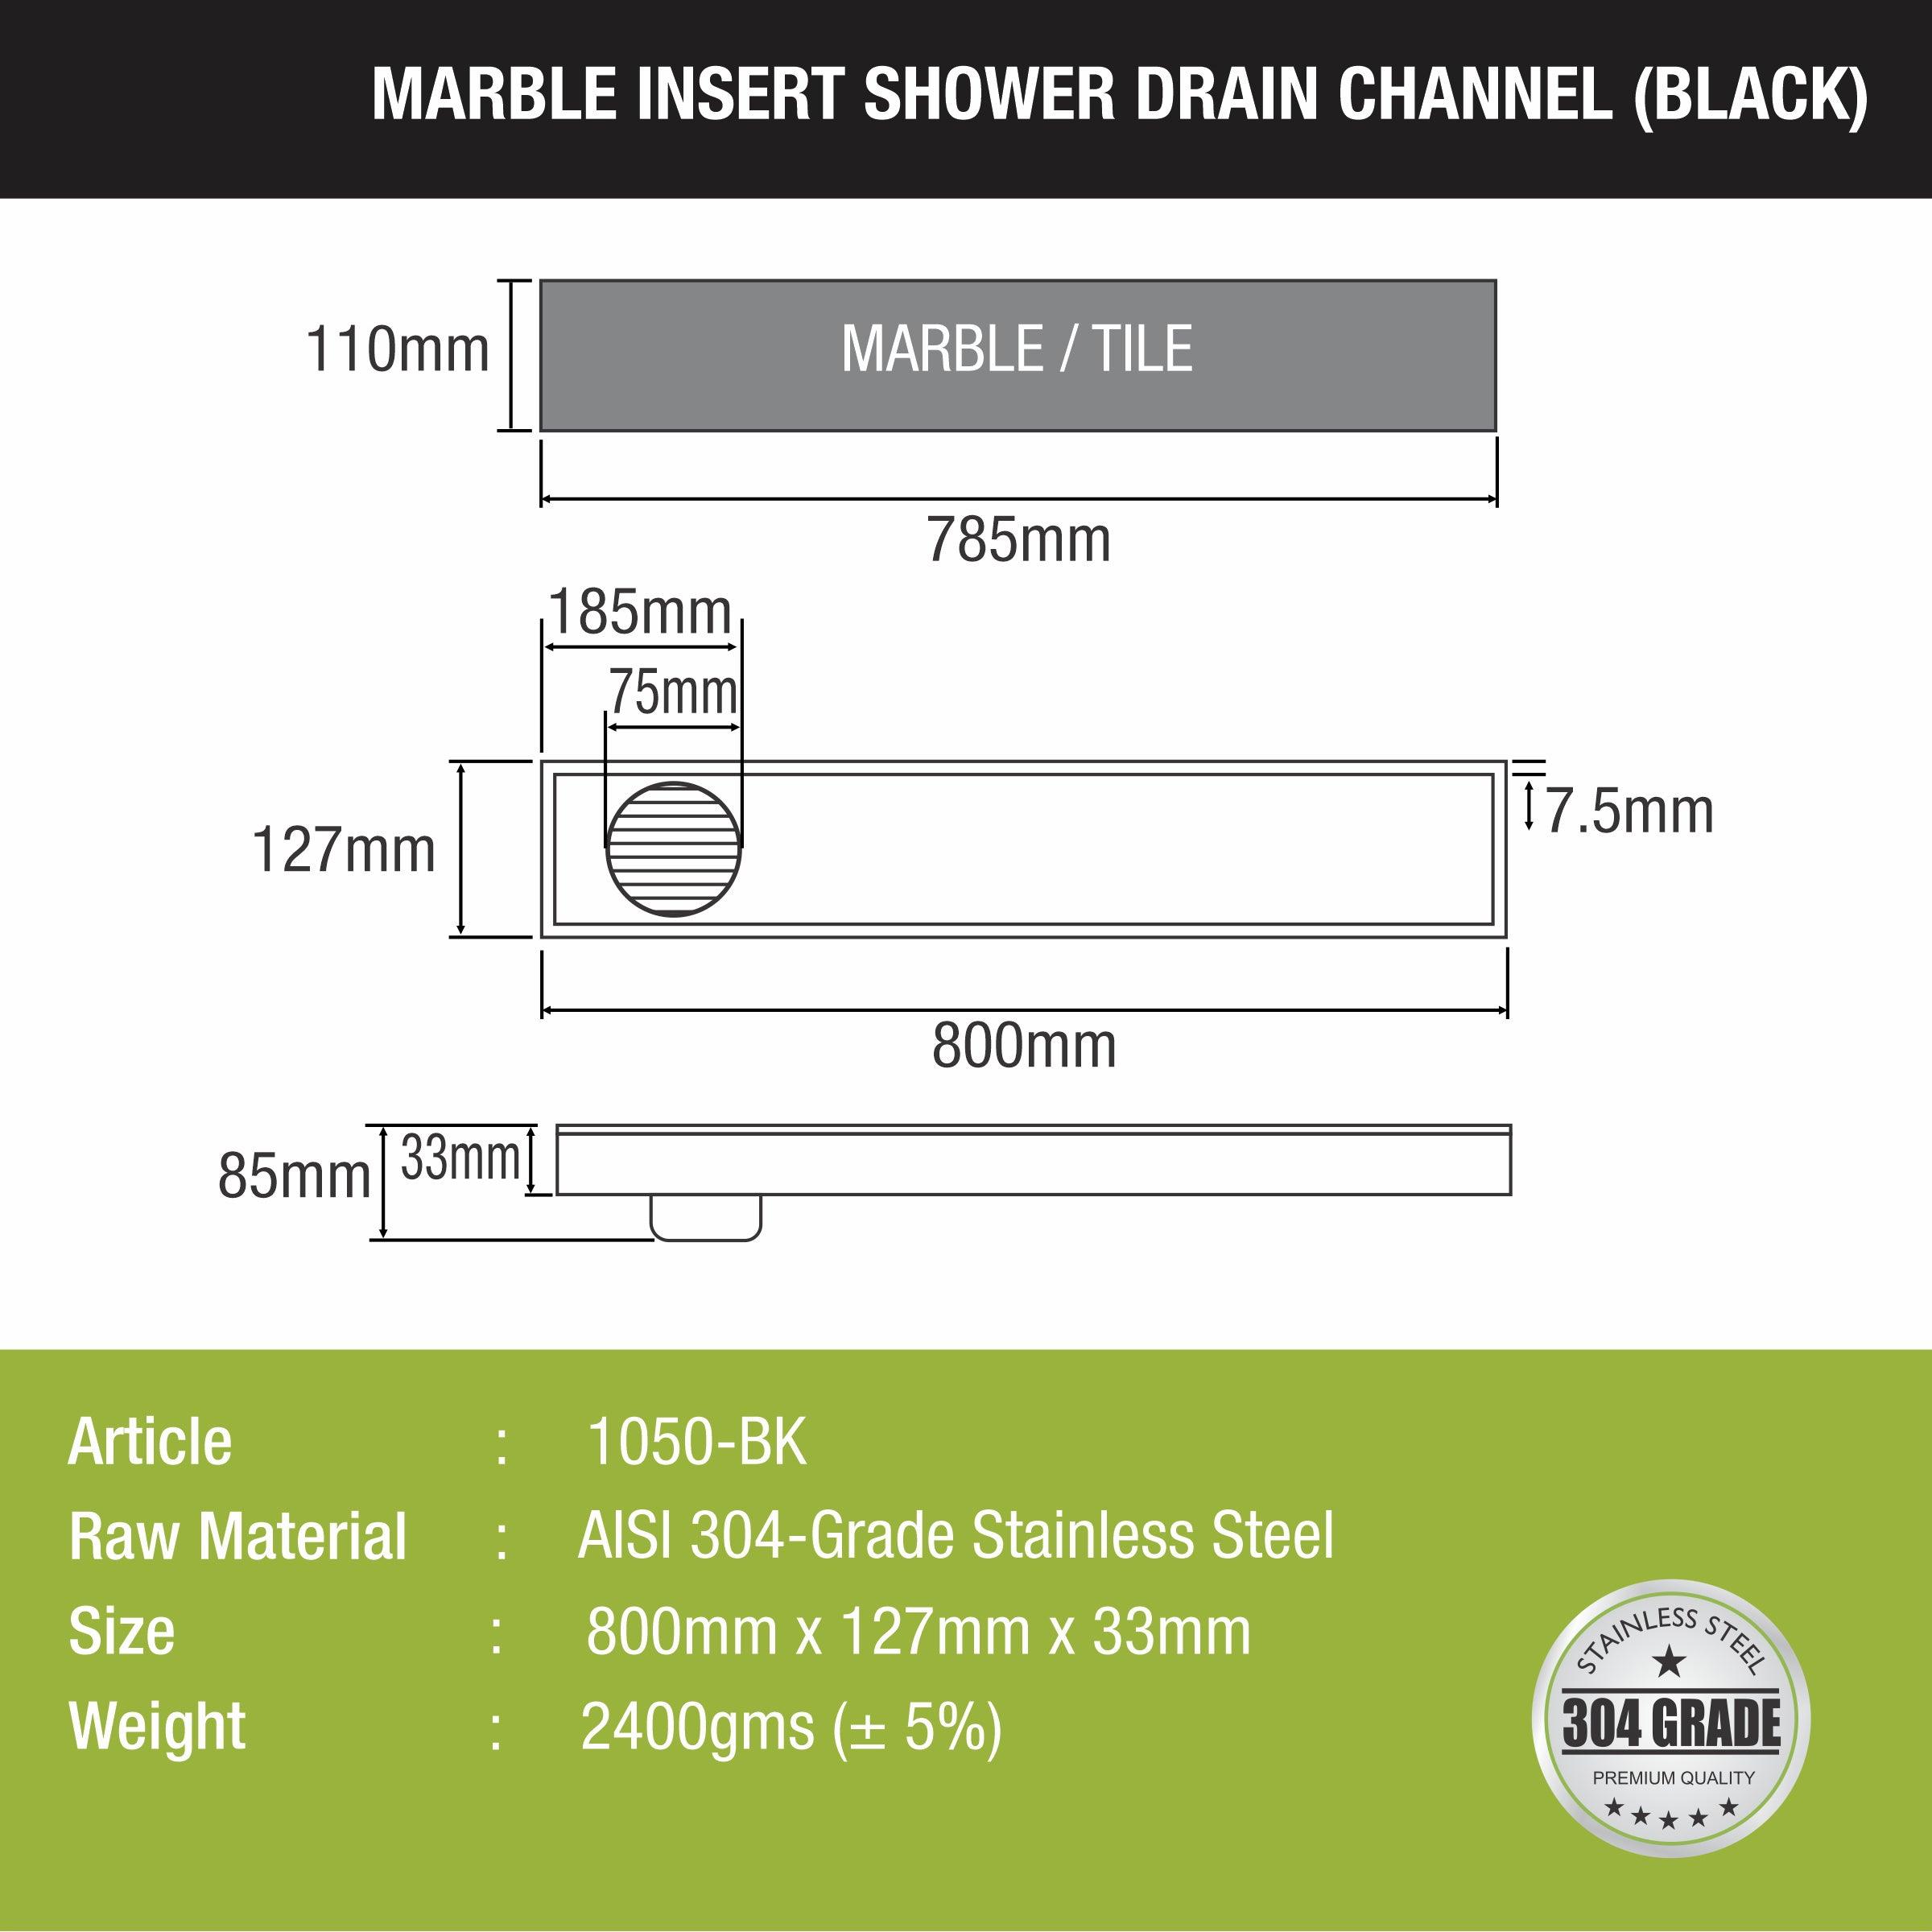 Marble Insert Shower Drain Channel - Black (32 x 5 Inches) size and measurement 